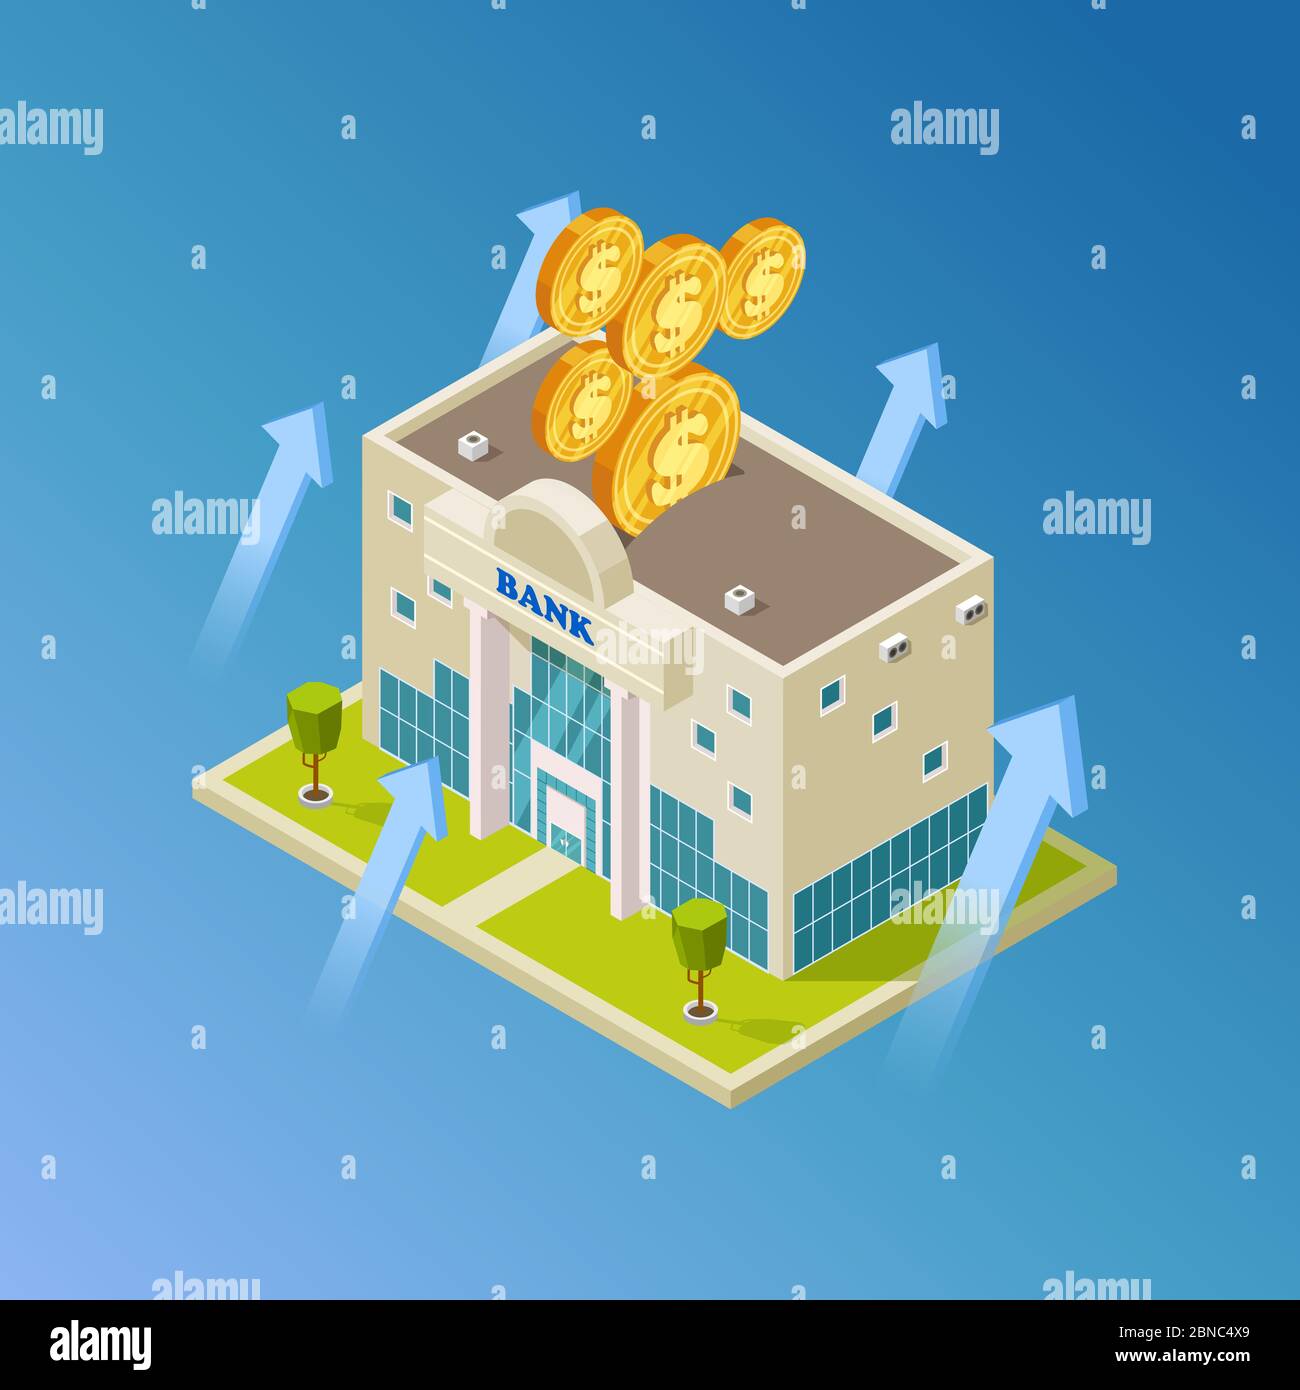 Financial, business, banking vector concept. Isometric 3d bank building, coins illustration Stock Vector